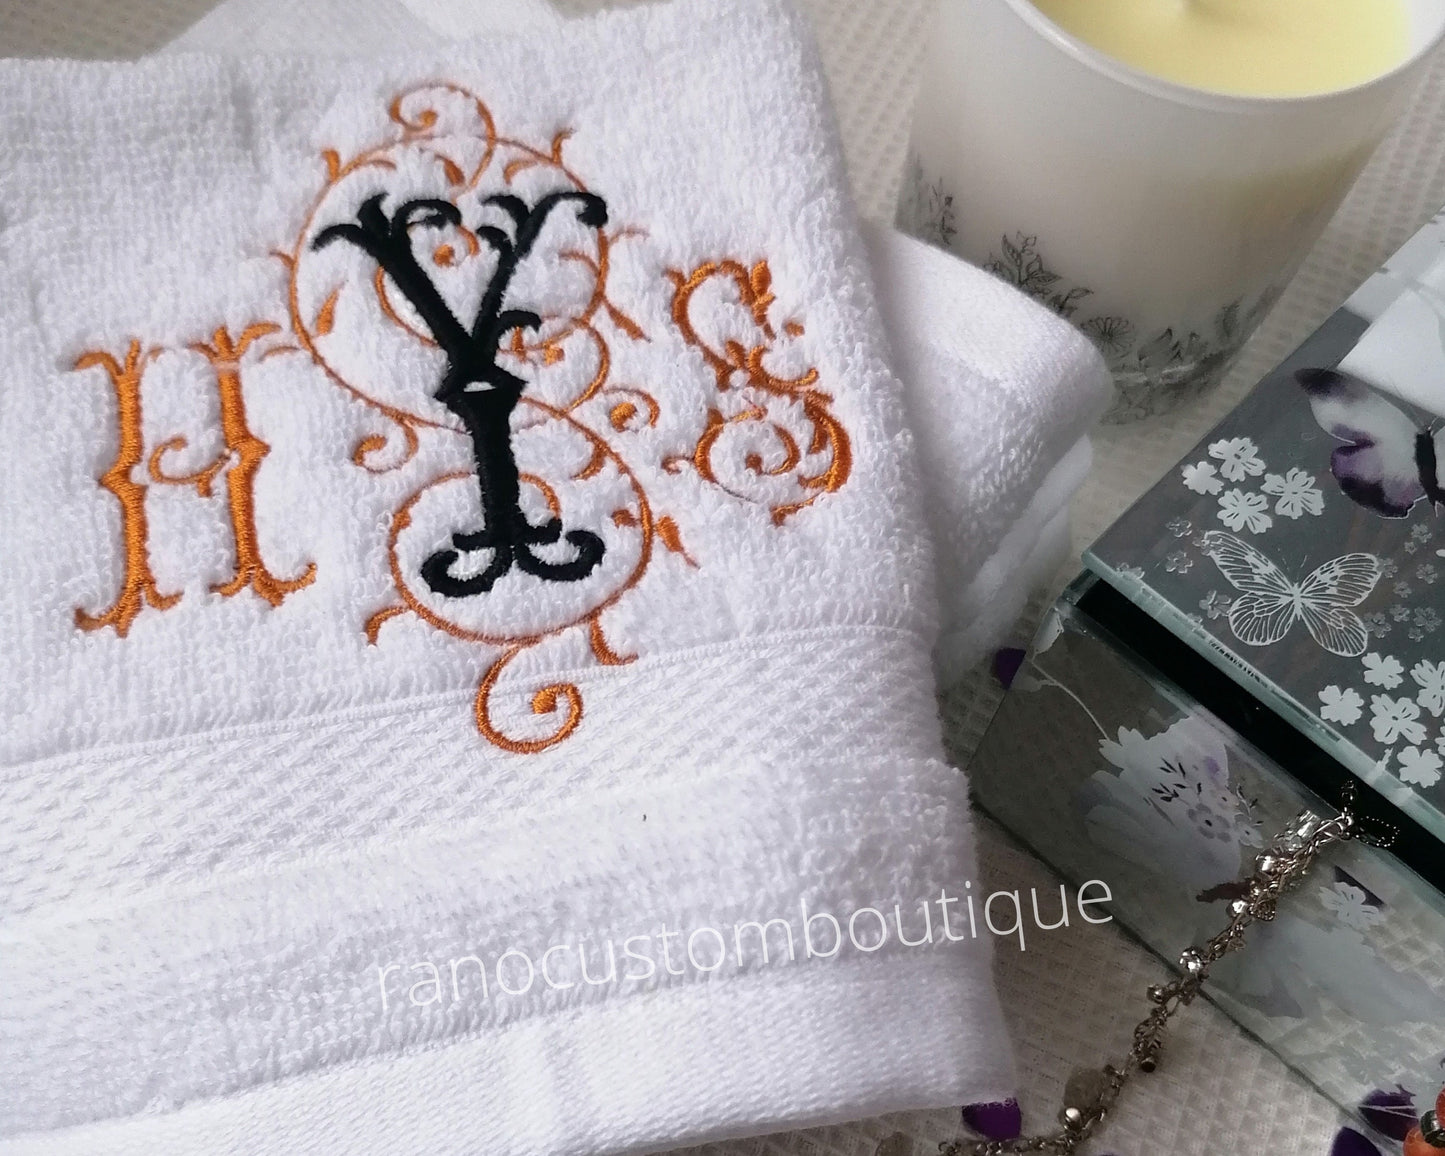 Personalized Flannel/Washcloth, Embroidered Cotton Face Towel, Manoir Monogram Design, Monogrammed Face cloth